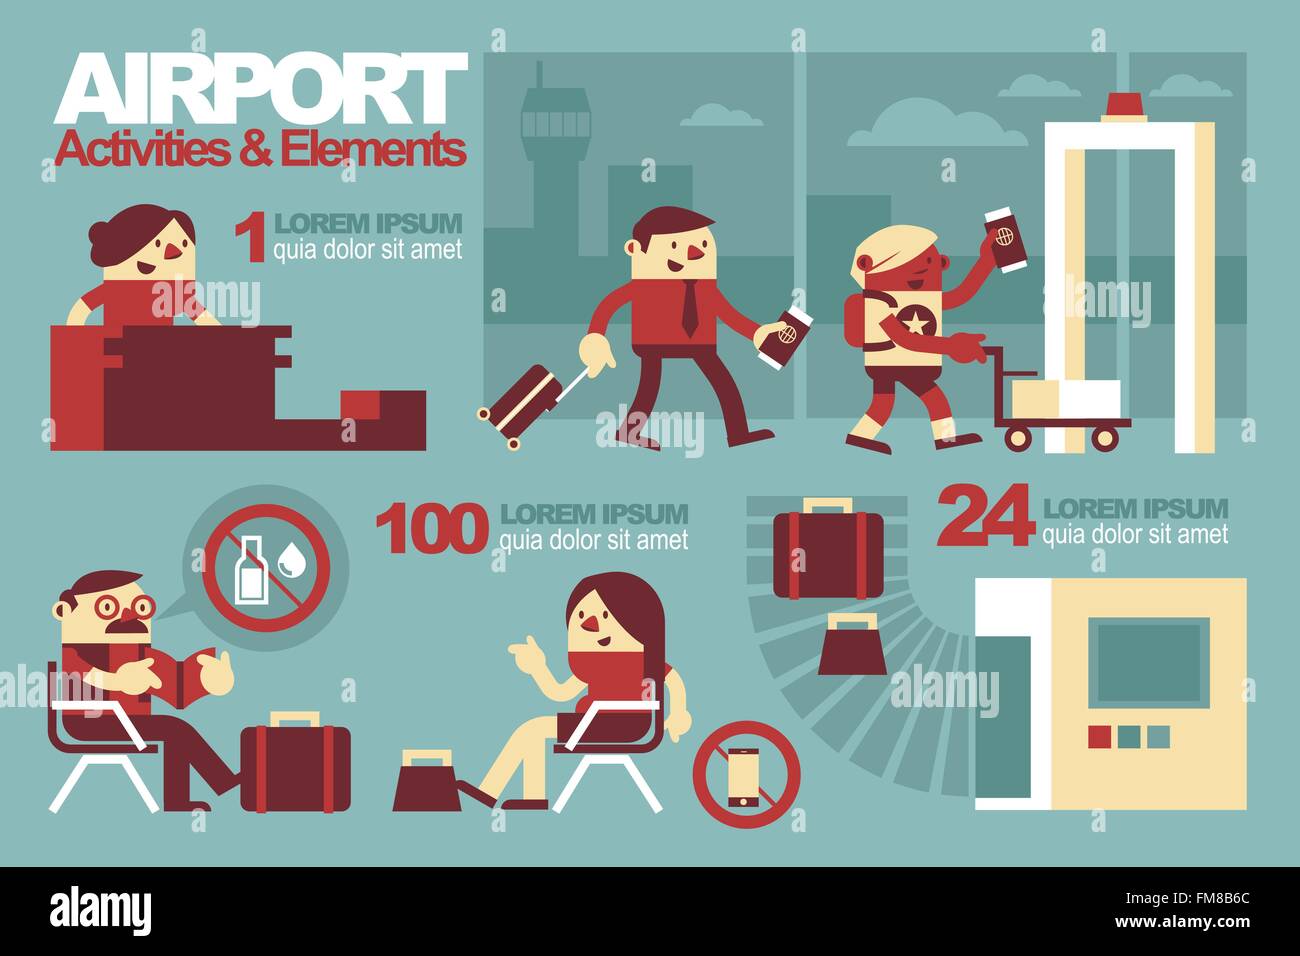 Vector Illustration Inside The Airport, Activities and Elements. Stock Vector